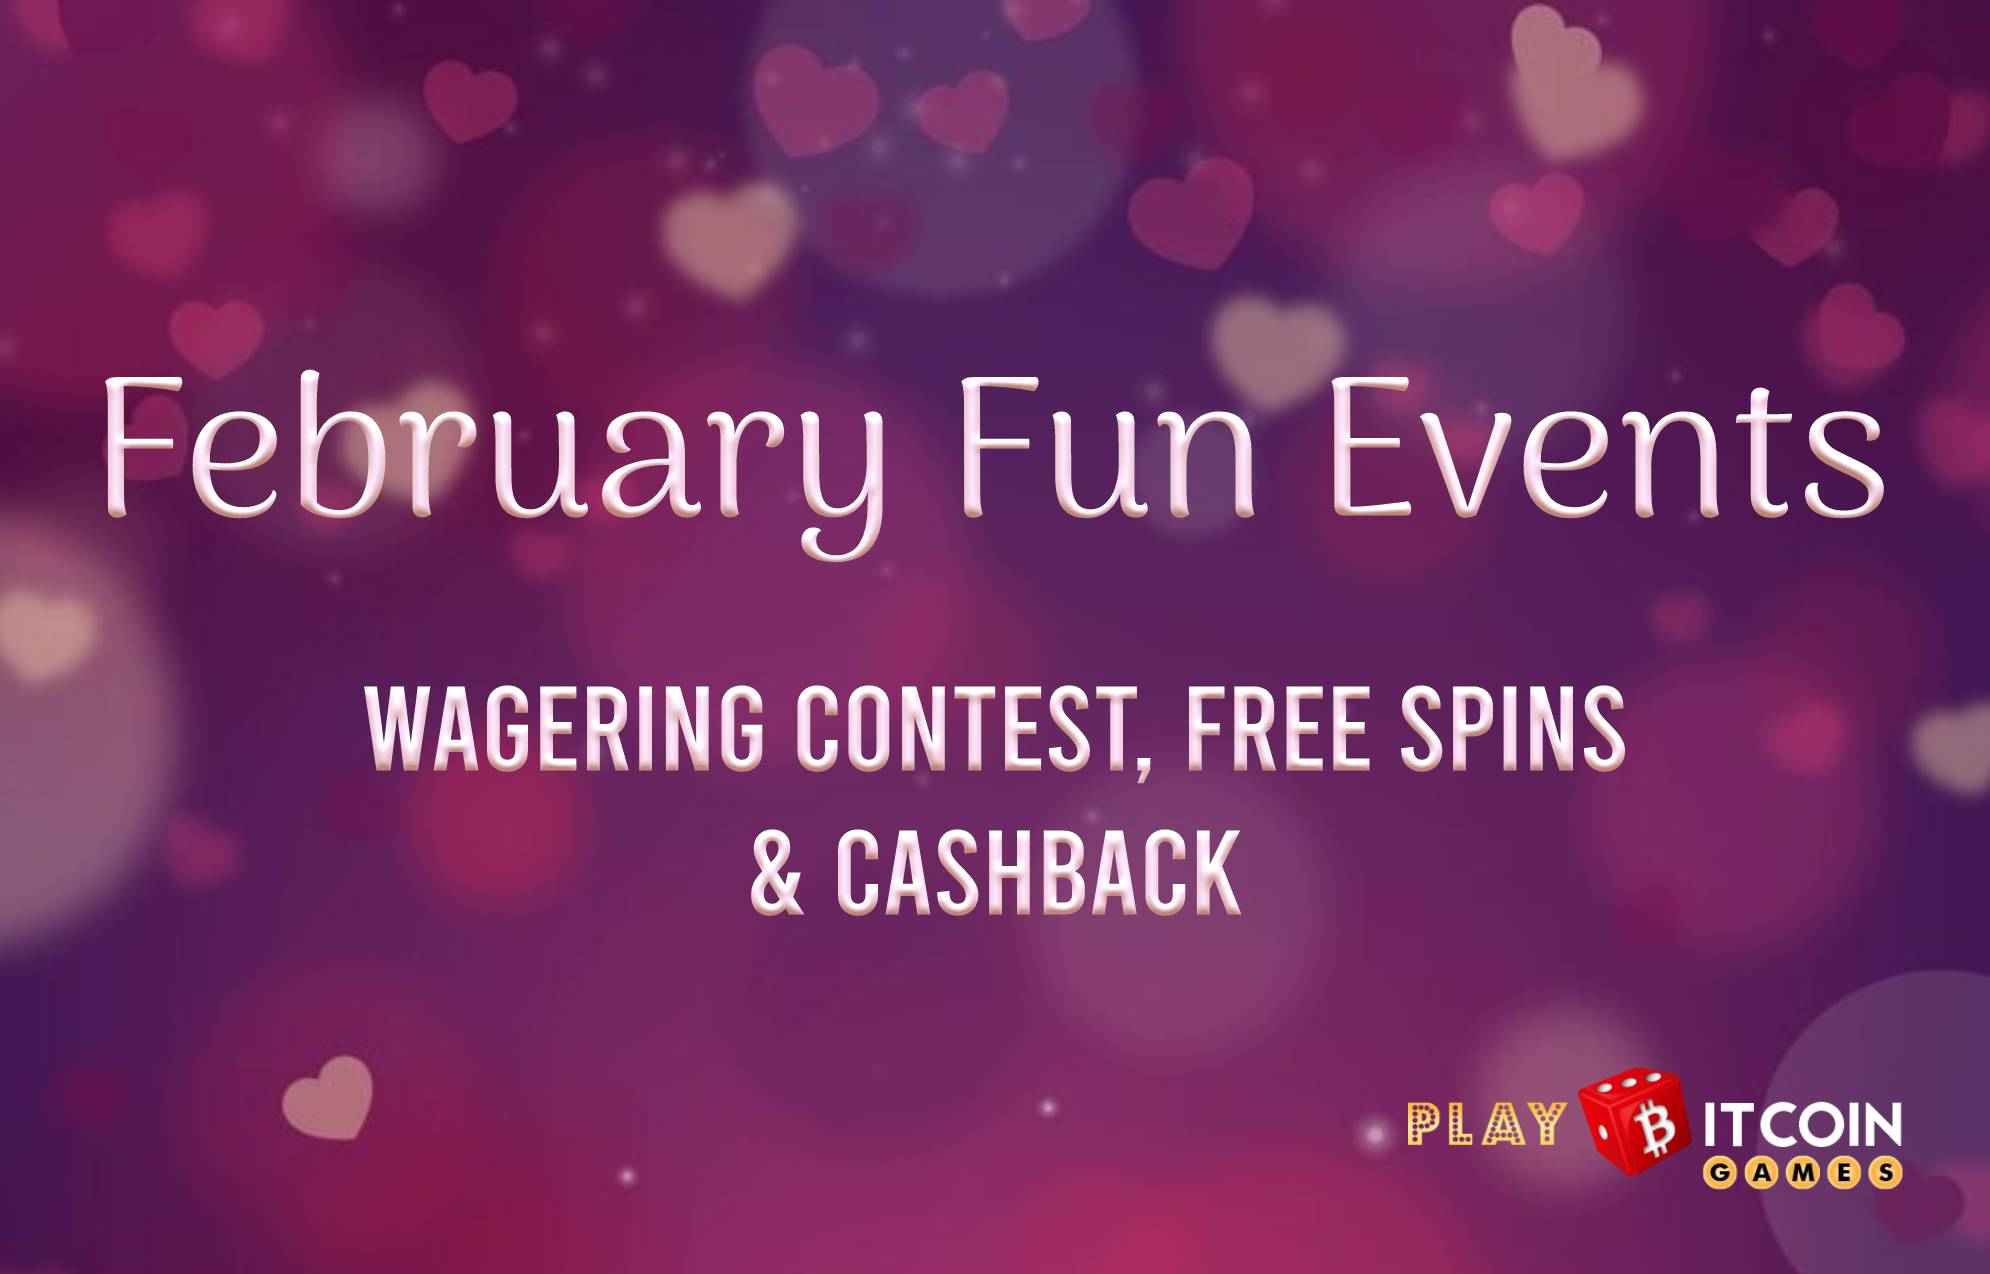 February Fun at PBG: Exciting Events and Sweet Promos Await!